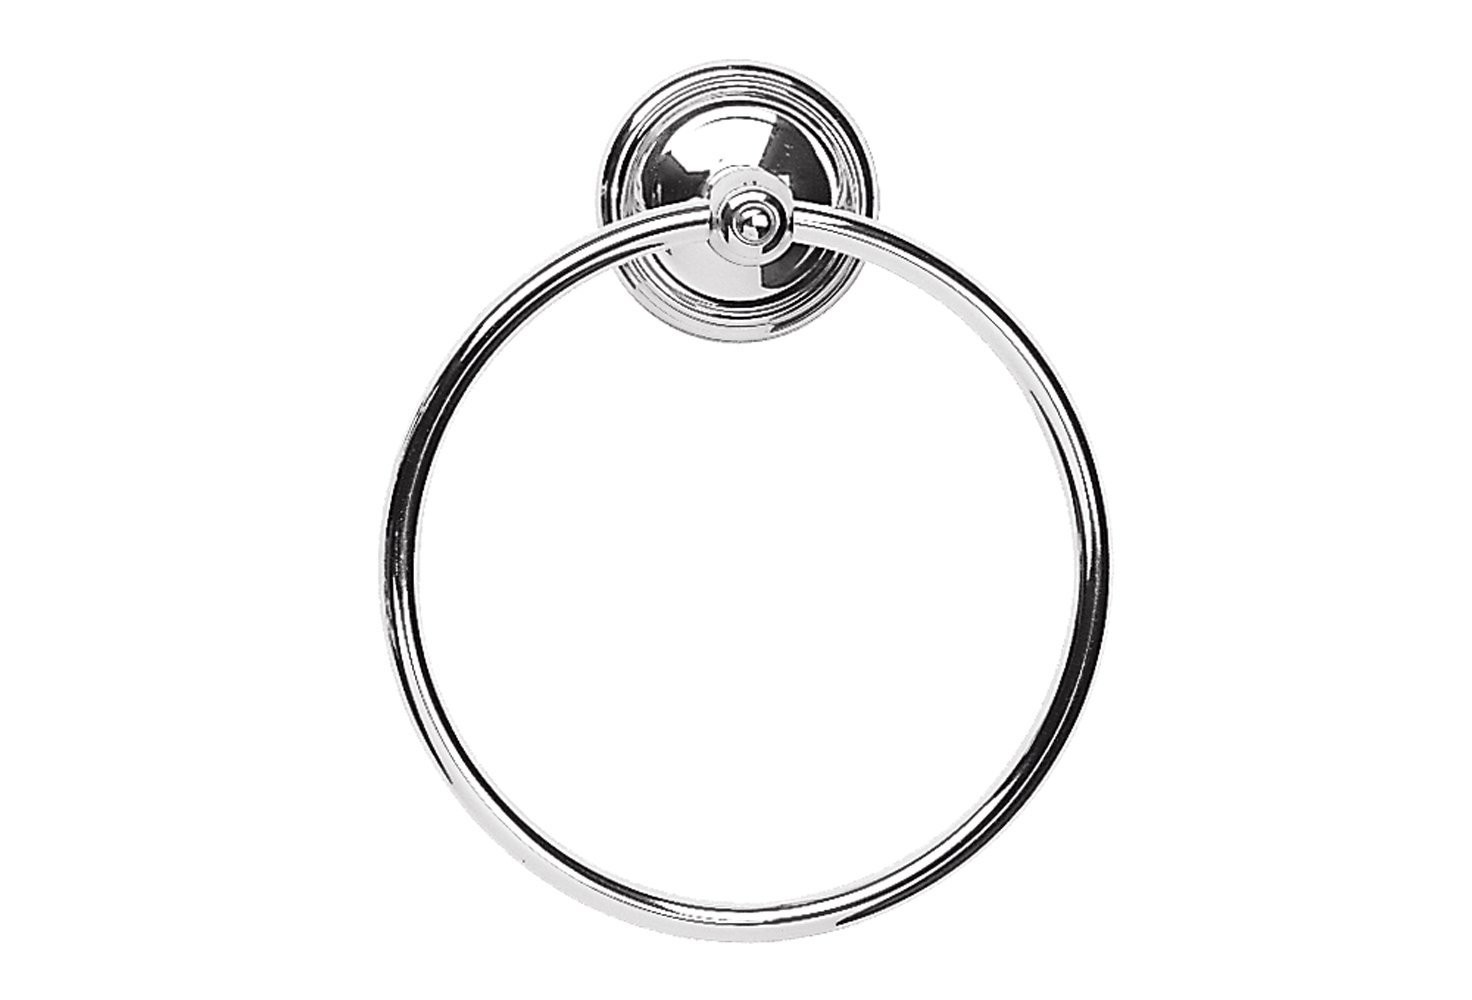 PHYLRICH KG40 REVERE & SAVANNAH 6 INCH WALL MOUNT TOWEL RING